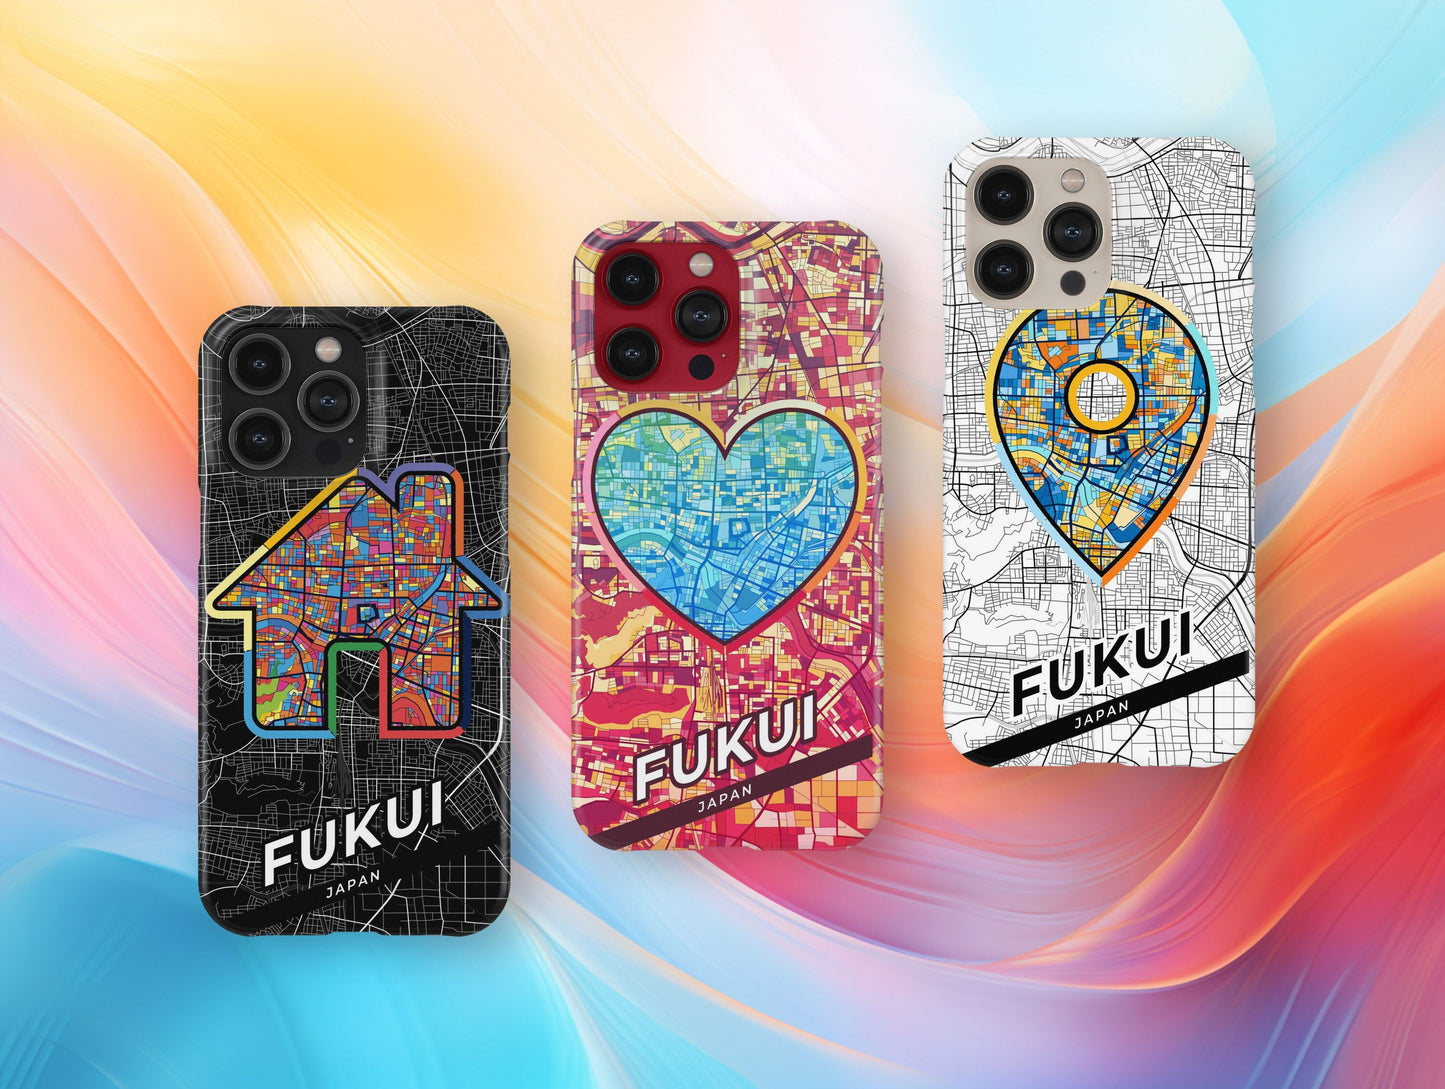 Fukui Japan slim phone case with colorful icon. Birthday, wedding or housewarming gift. Couple match cases.